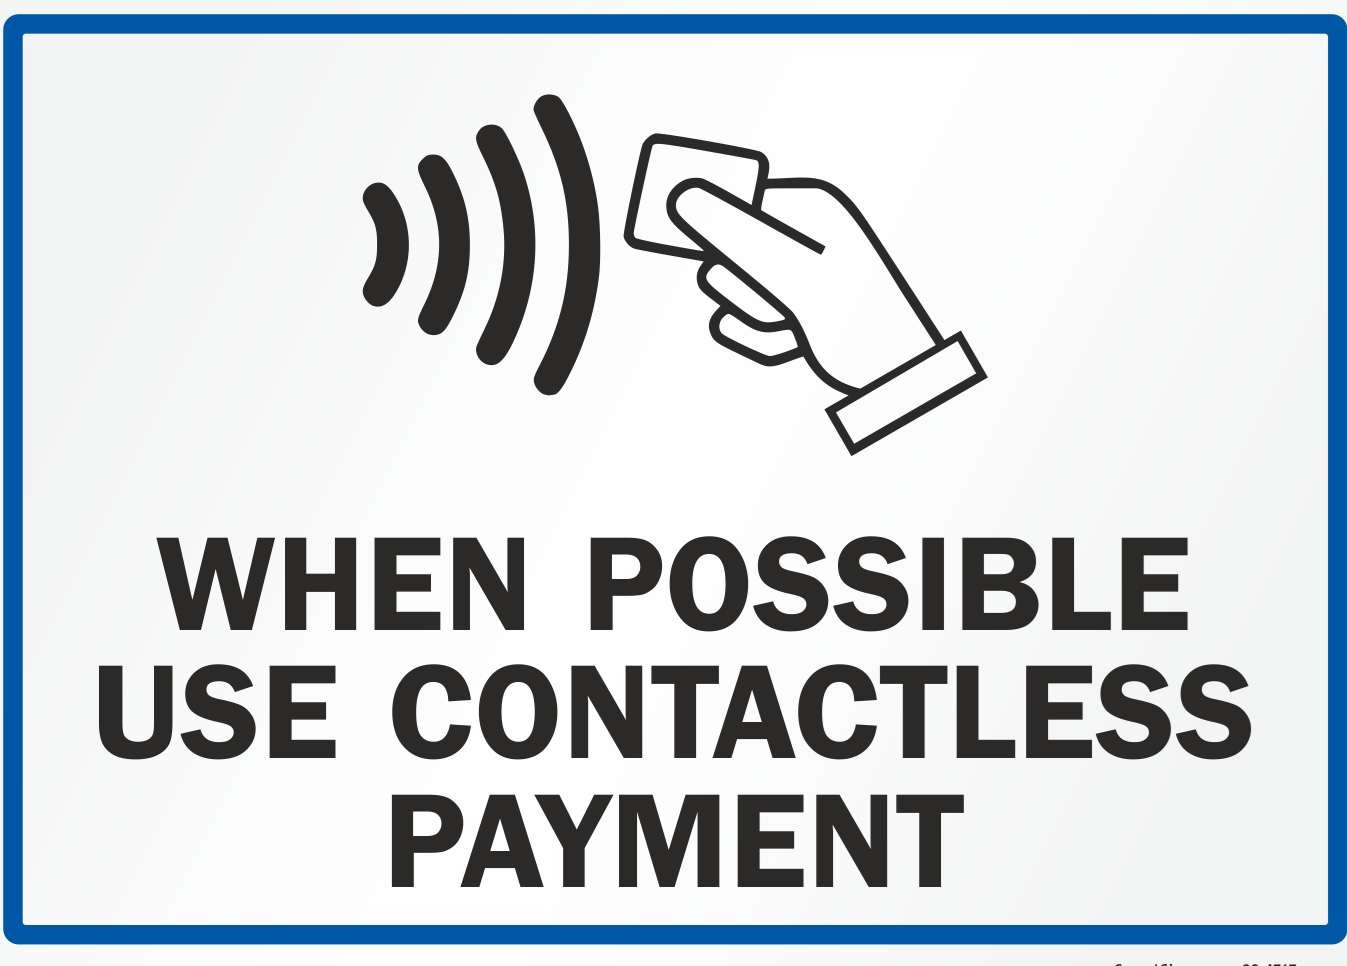 Contactless preferred